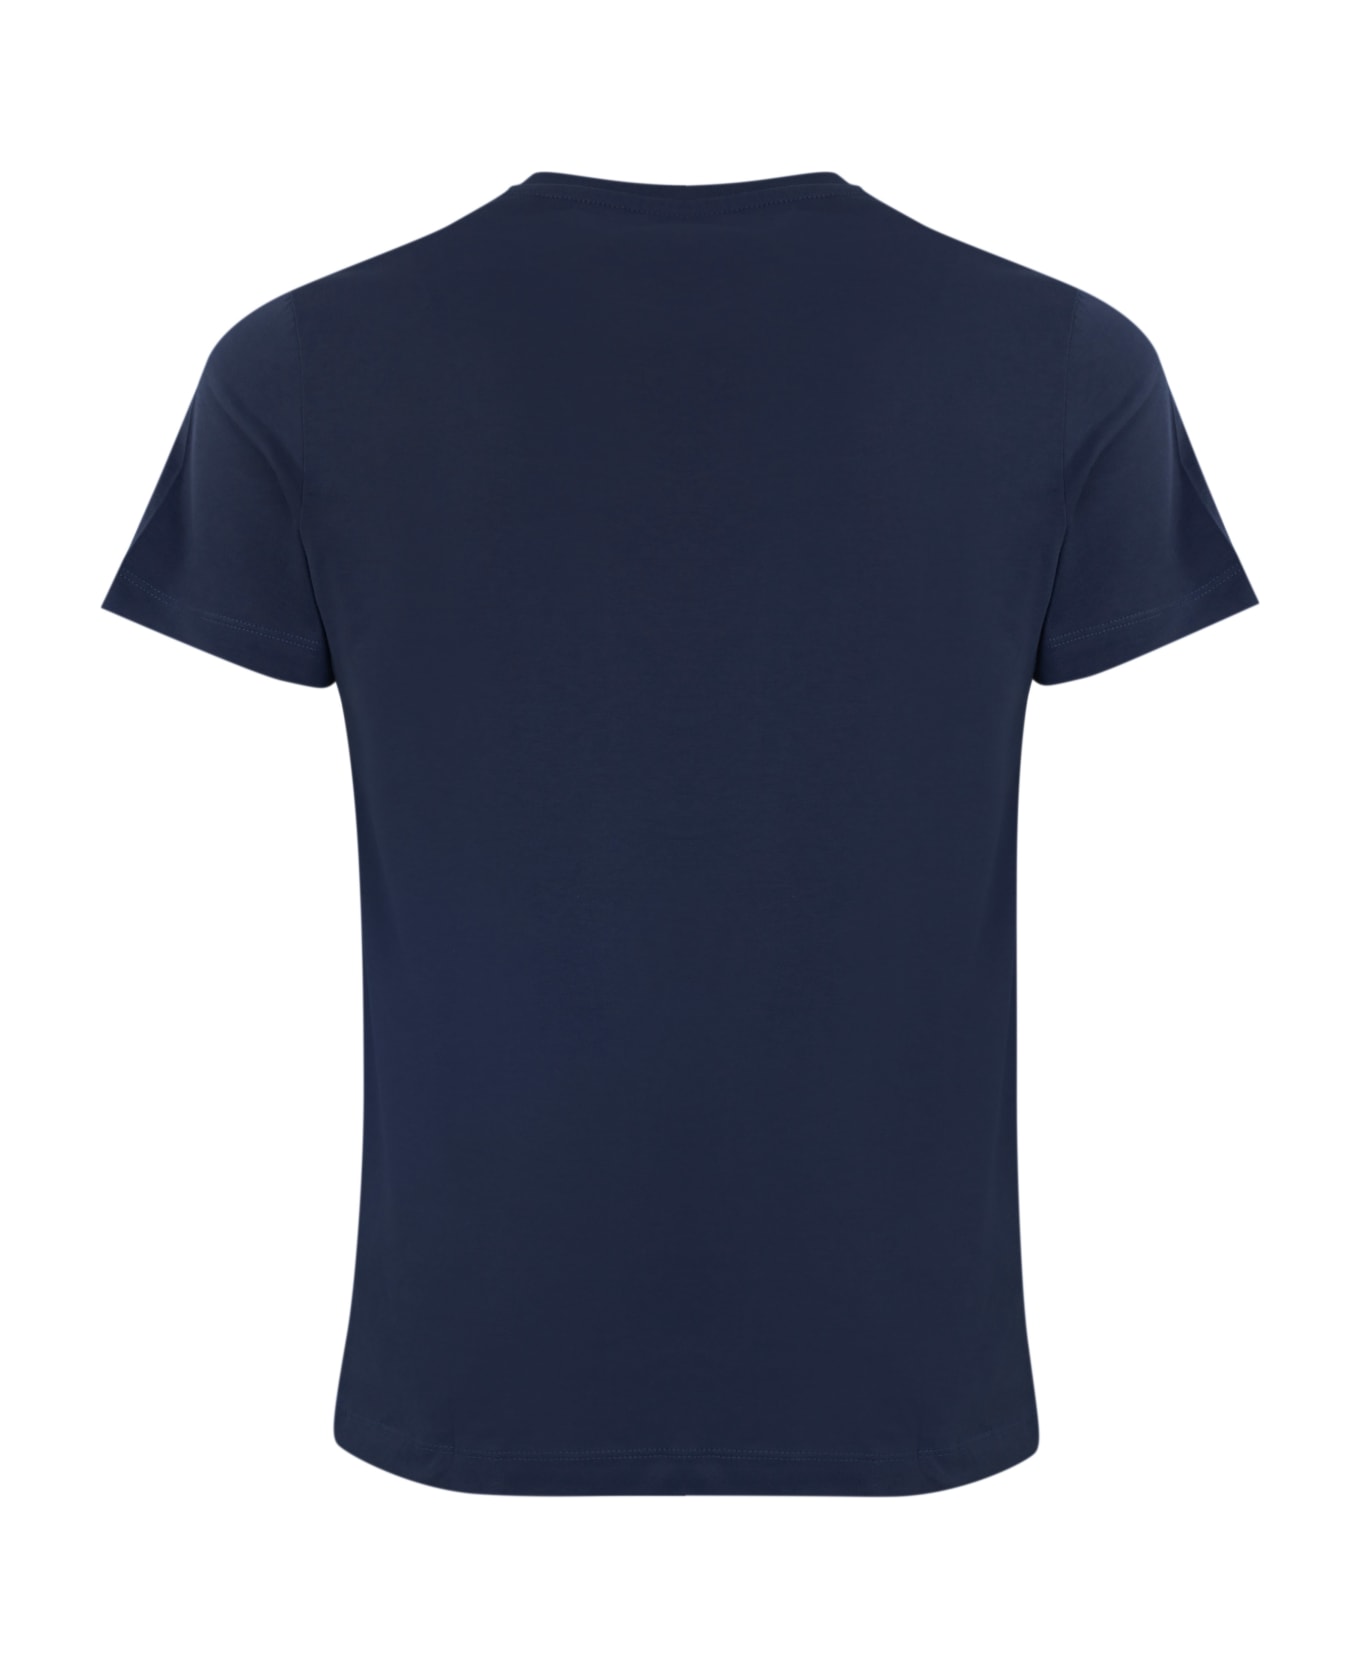 Roy Rogers Blue Cotton T-shirt With Pocket - Navy blue